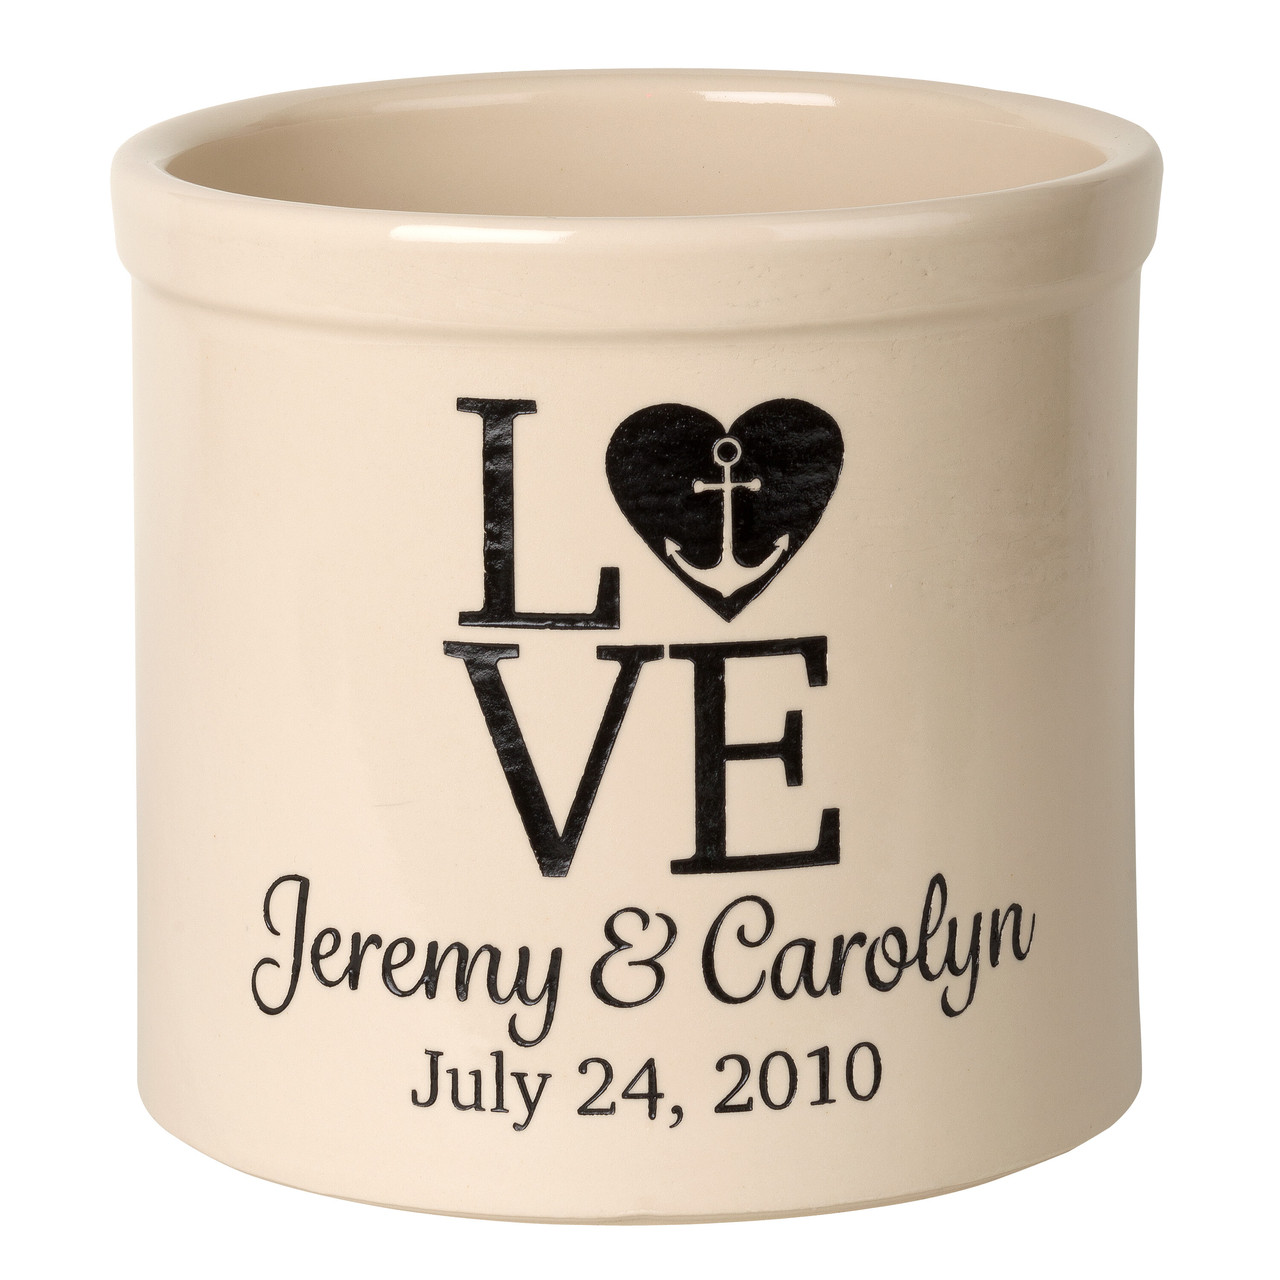 Personalized Stoneware Crock with Anchor and Heart - "Love"